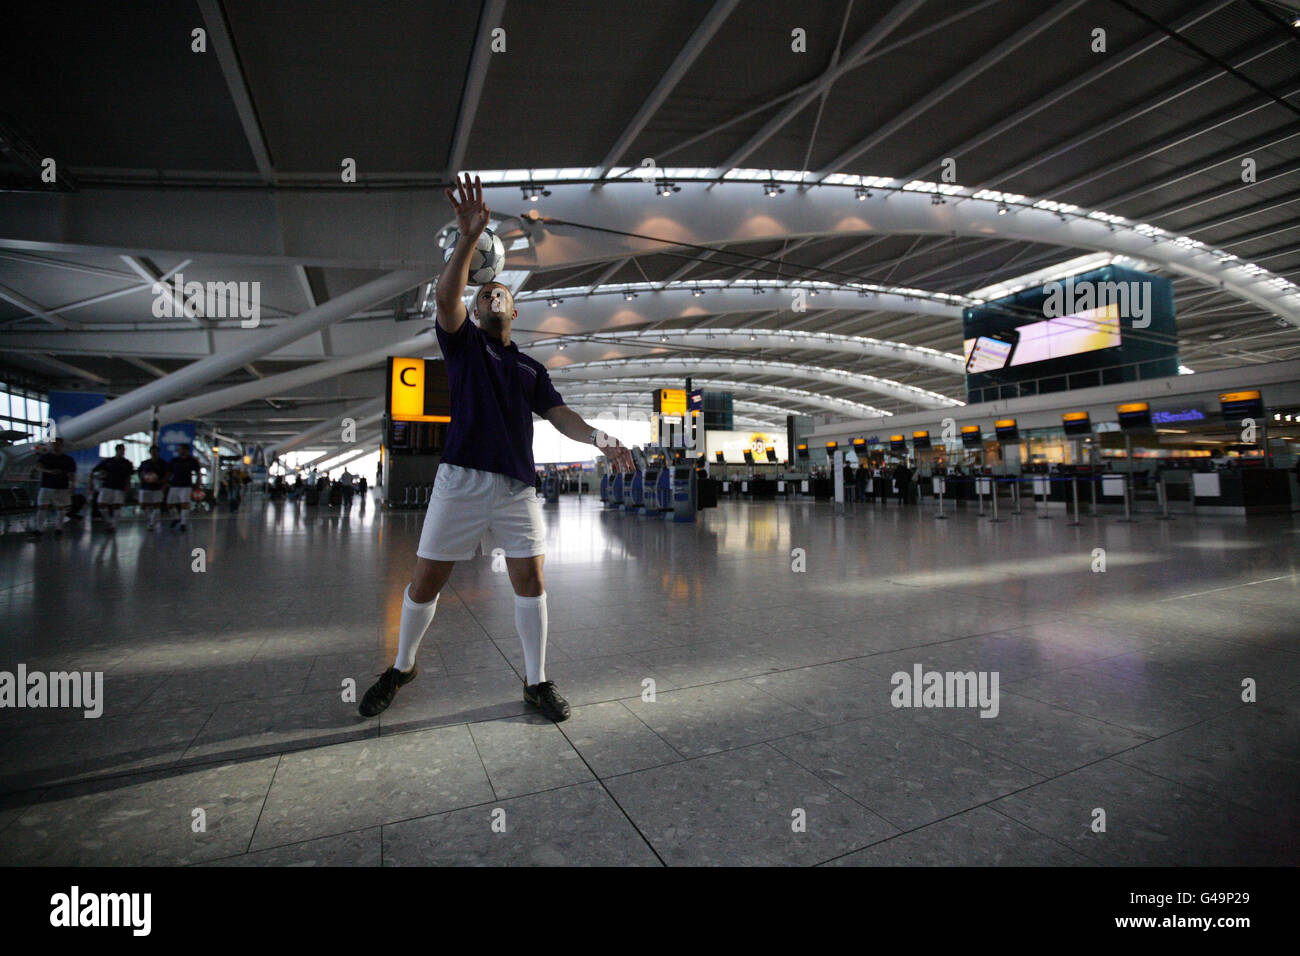 Freestyle footballer Colin Nell demonstrates his skills in Terminal 5 of Heathrow Airport as the UEFA Champions League trophies are displayed ahead of the men's final at Wembley on 28 May 2011 and the Women's Final at Craven Cottage on 26 May 2011. Stock Photo